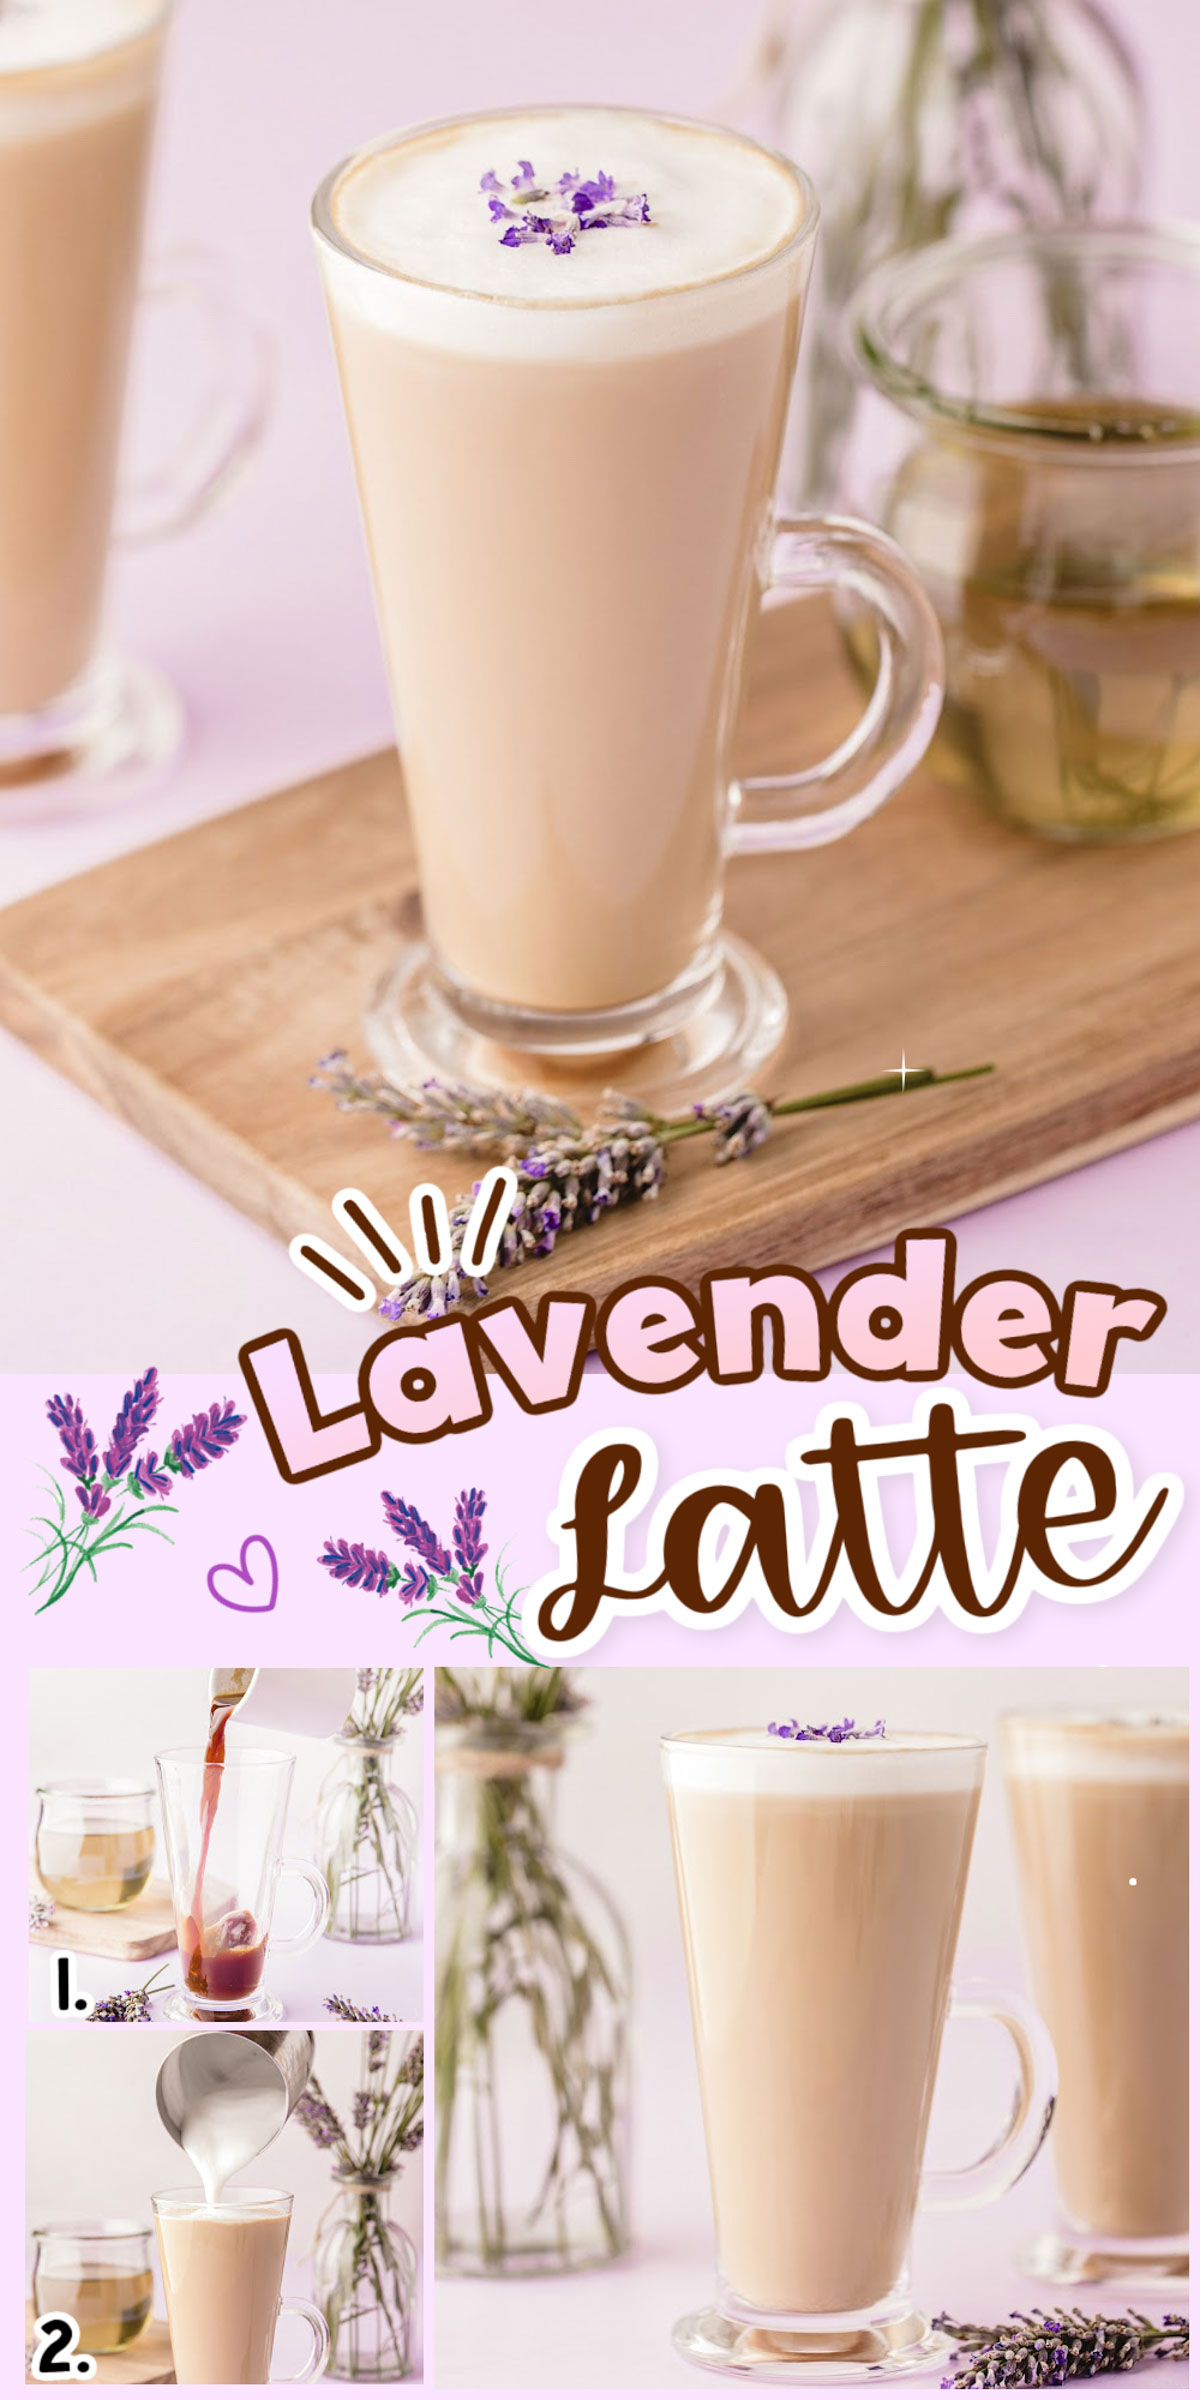 This Lavender Latte is a creamy hot drink that's made right at home with espresso, milk, and sweetened aromatic lavender syrup! Make this homemade floral latte in just 5 minutes! via @sugarandsoulco